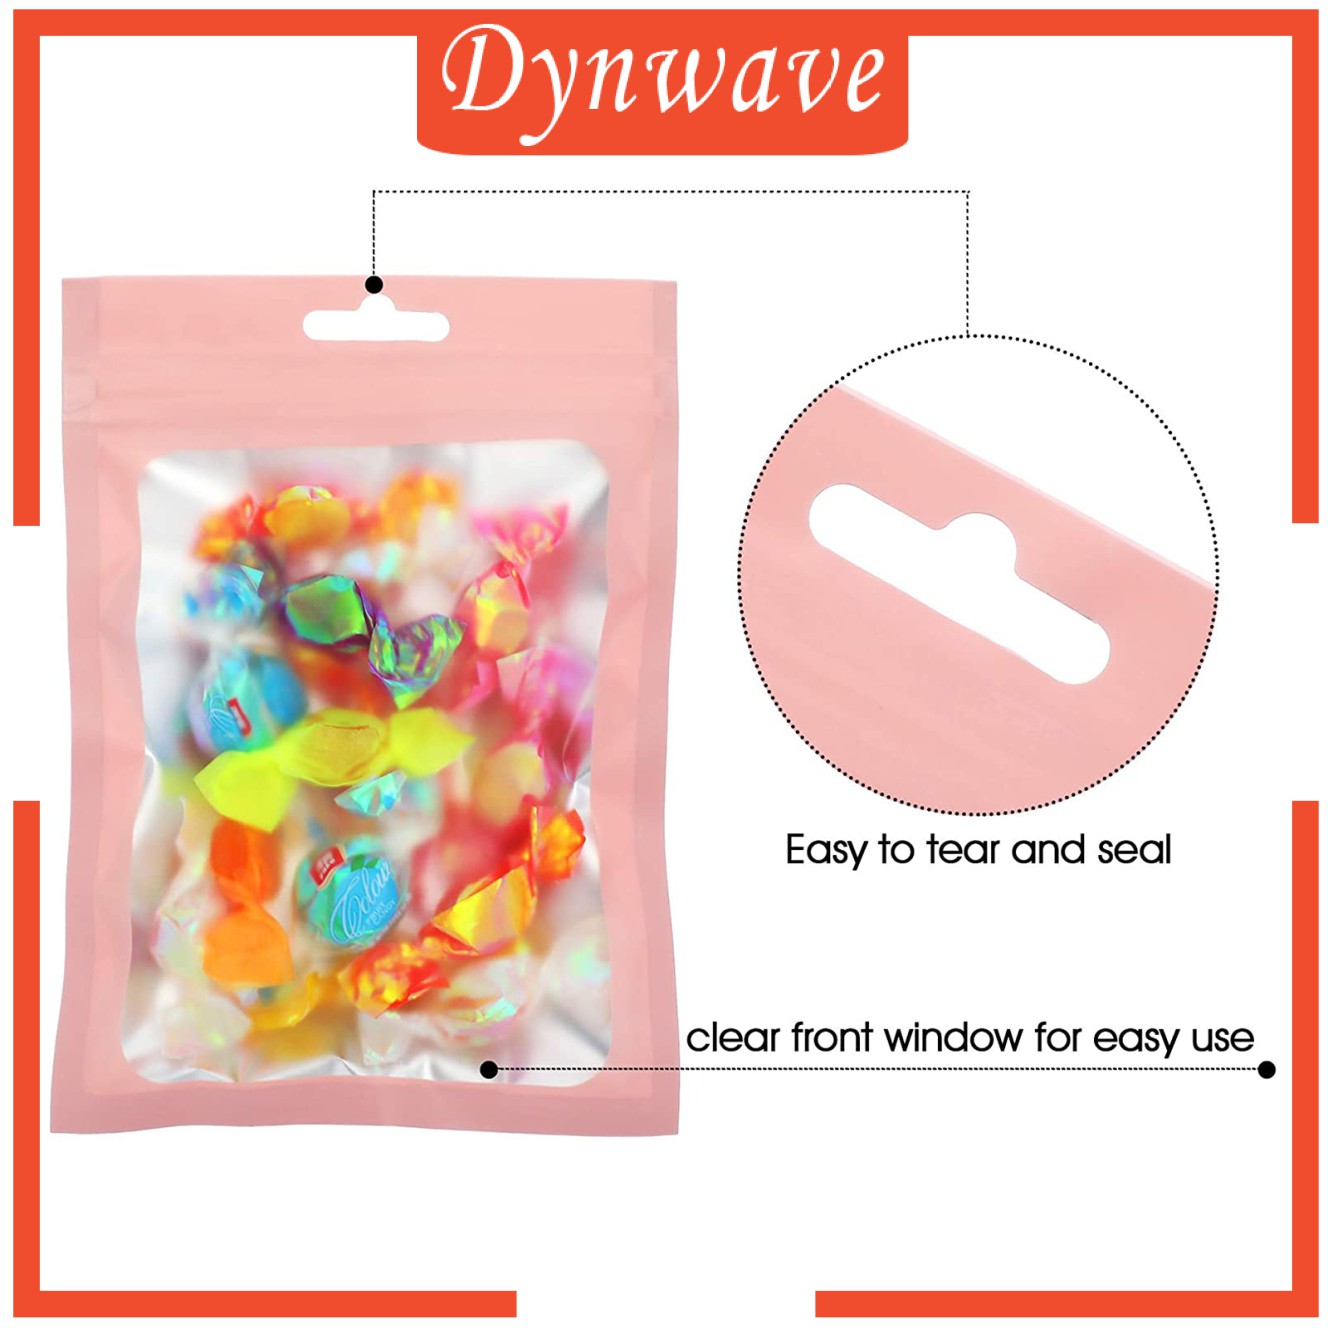 [DYNWAVE] 100pcs Mylar Foil Bags Resealable Food Container Packing Storing Sampling